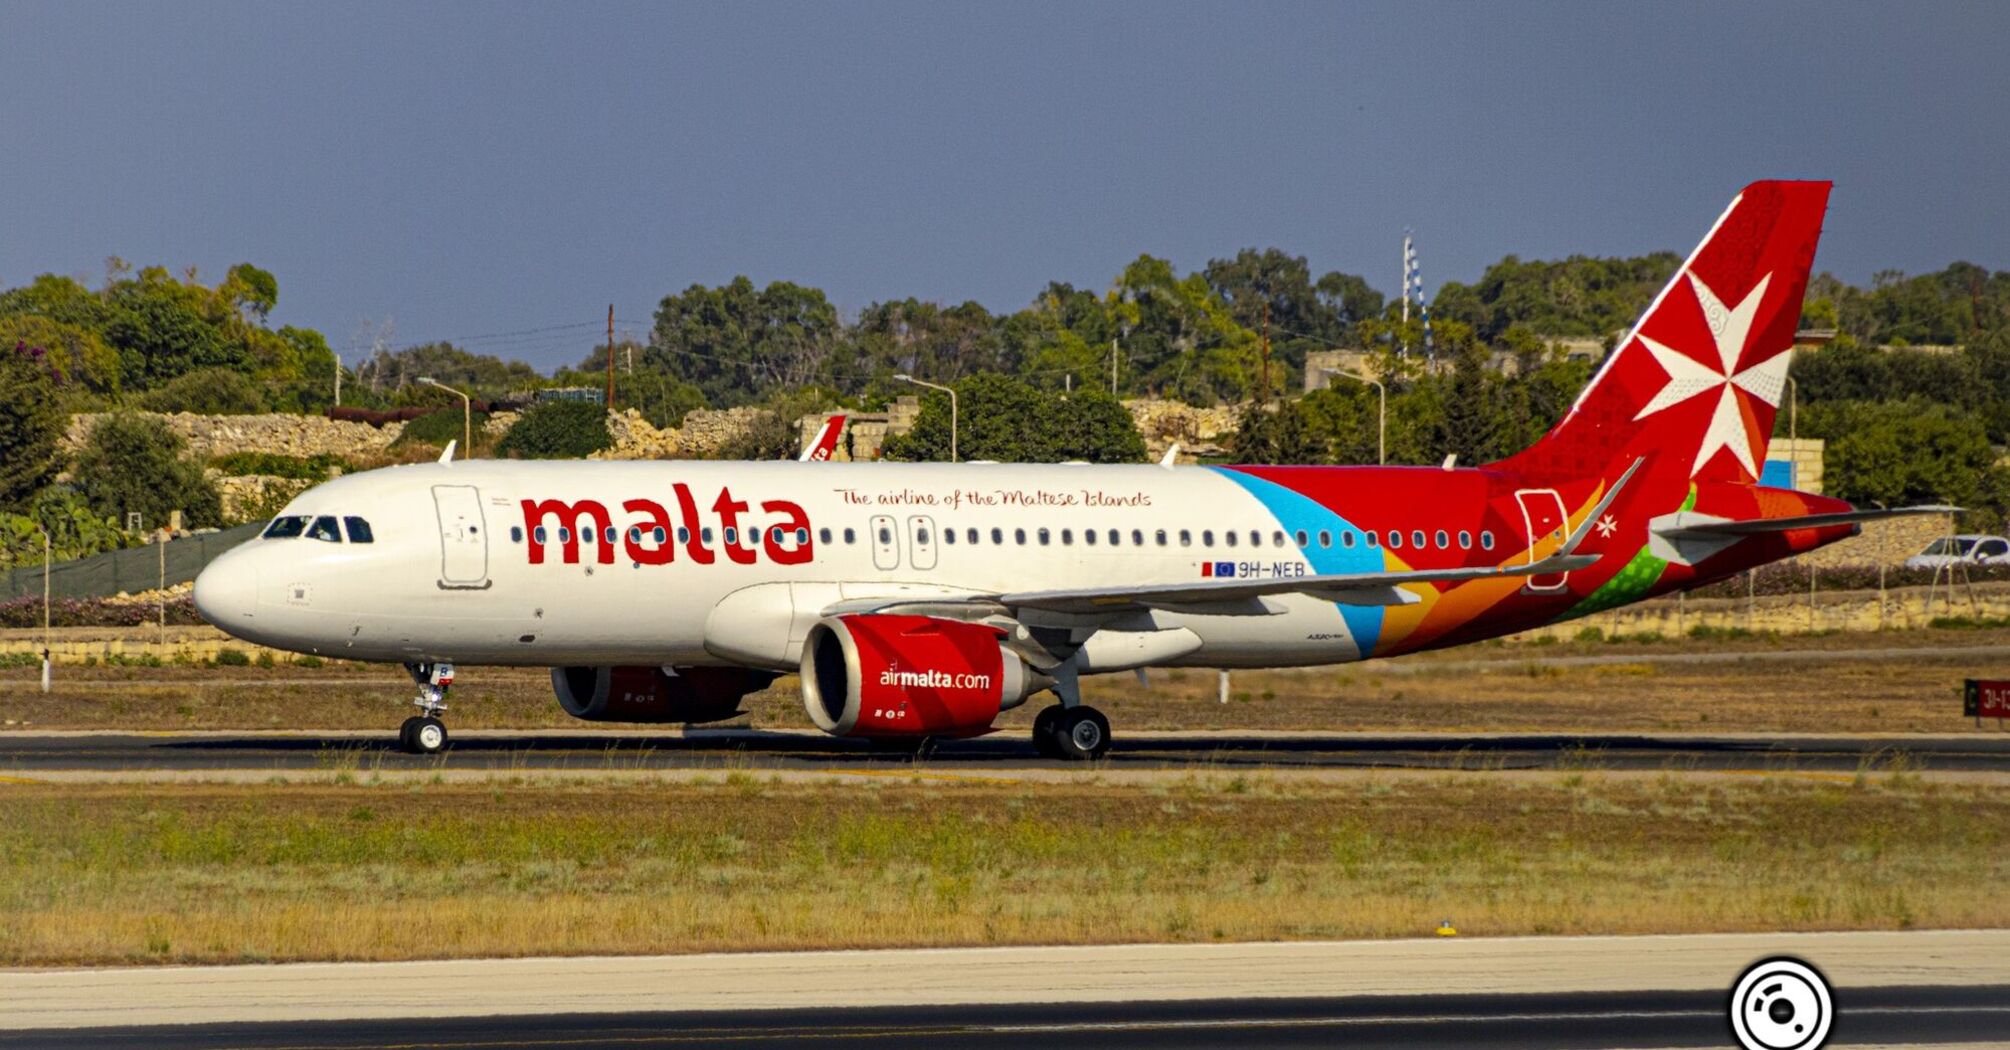 Air Malta has announced its new rules regarding the transportation of personal baggage